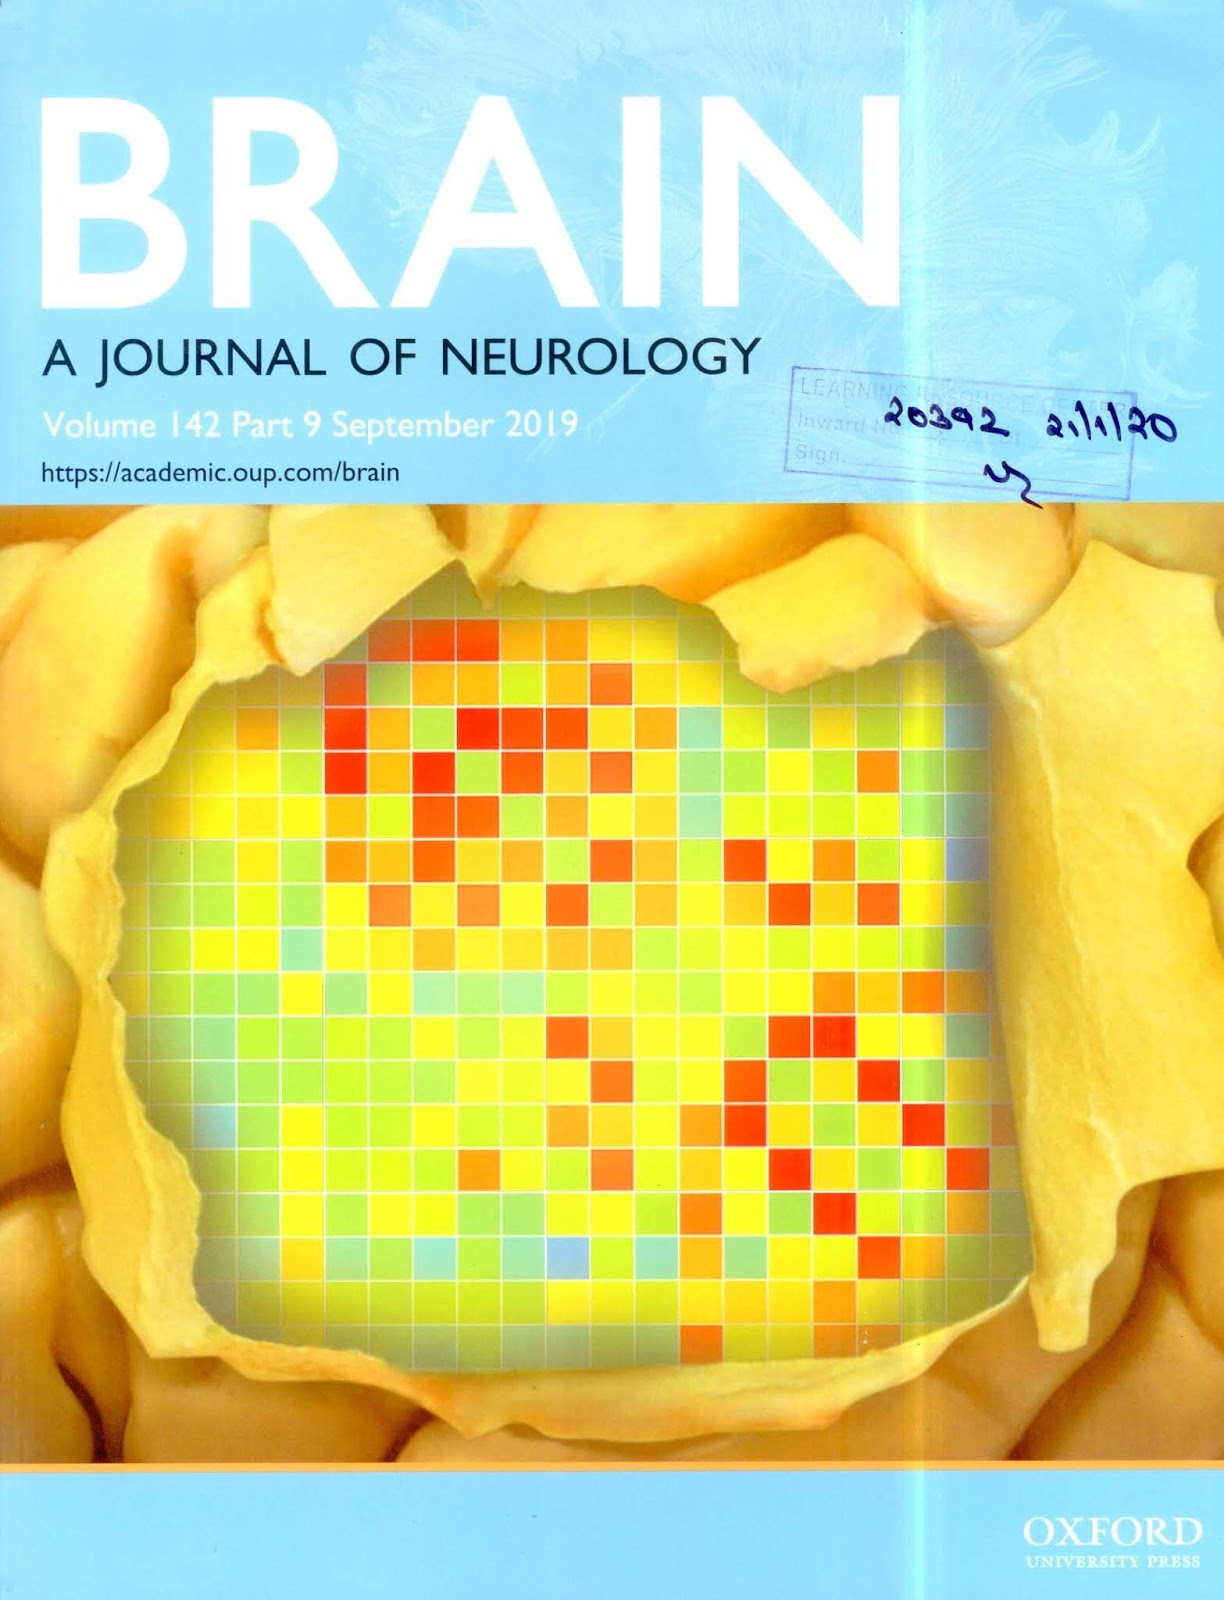 https://academic.oup.com/brain/issue/142/9